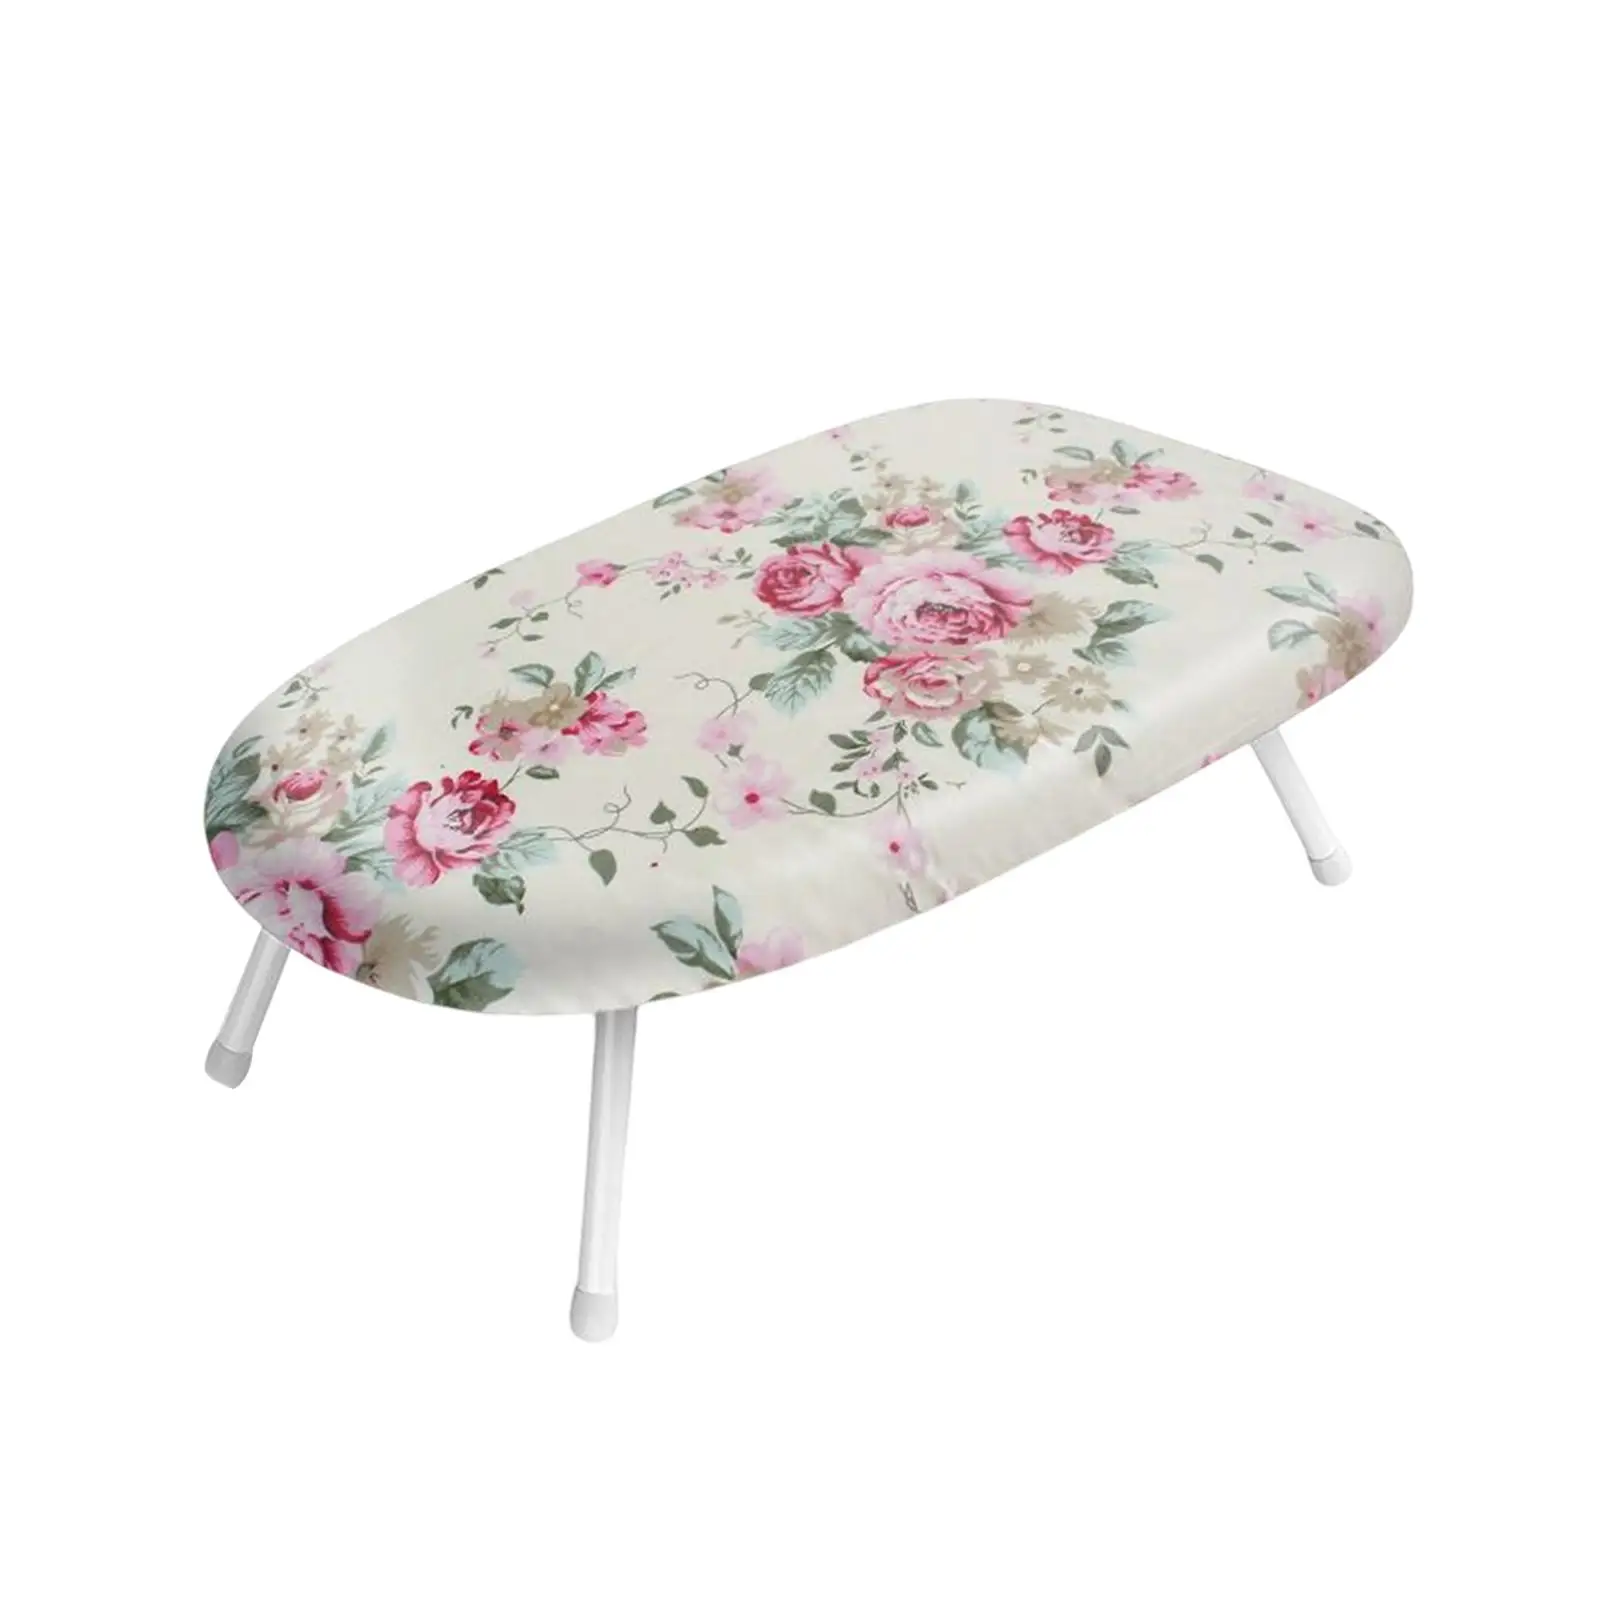 Multipurpose Countertop Ironing Board Collapsible Removable Sleeve Portable Small for Household Craft Room Sewing Dormitory